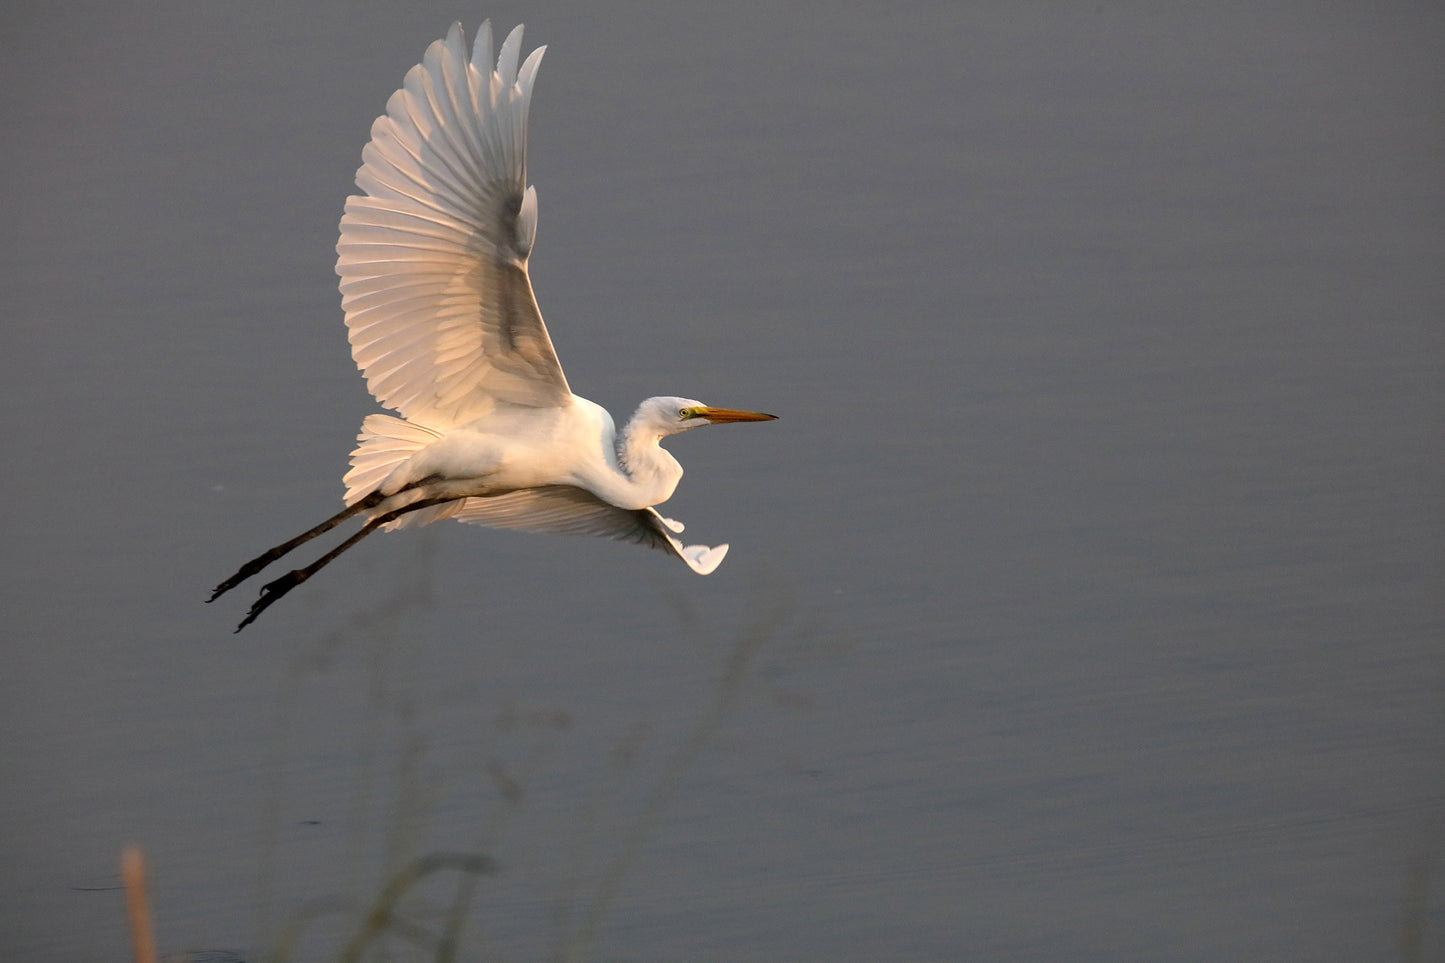 Fine Art Photography by Larry Hampton, Titled Flight of an Egret. The location was  Wildlife refuge in Gibson County, Indiana.